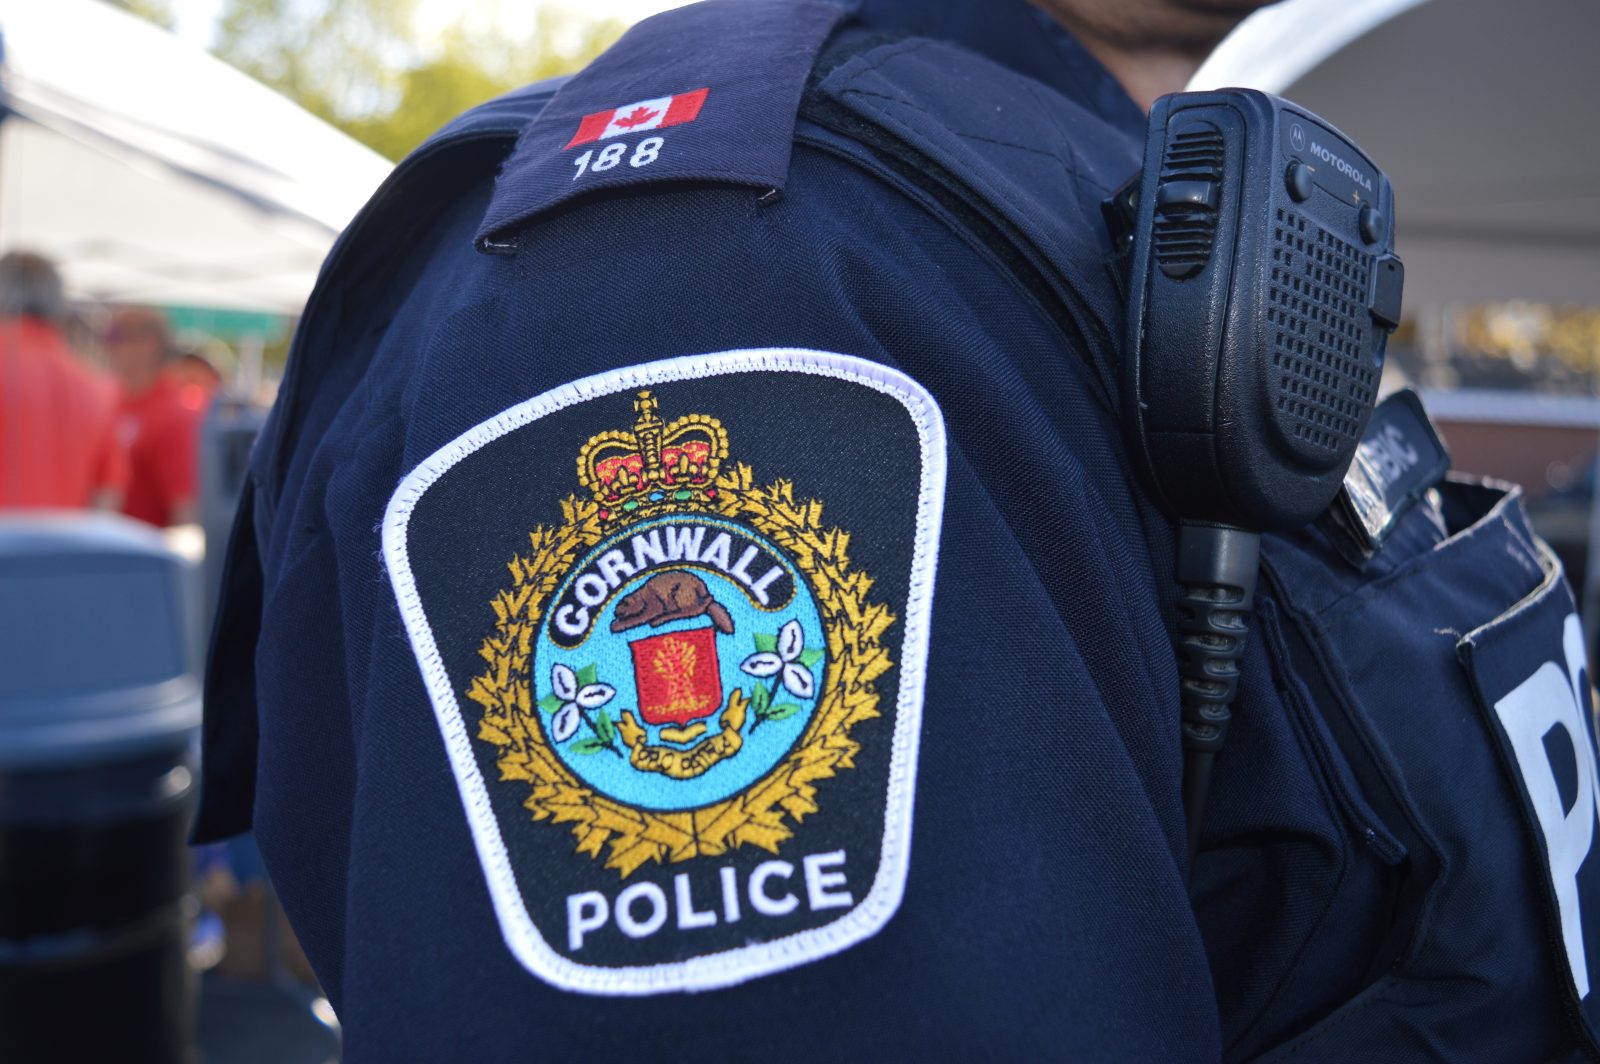 Cornwall woman strikes vehicle, under influence of alcohol